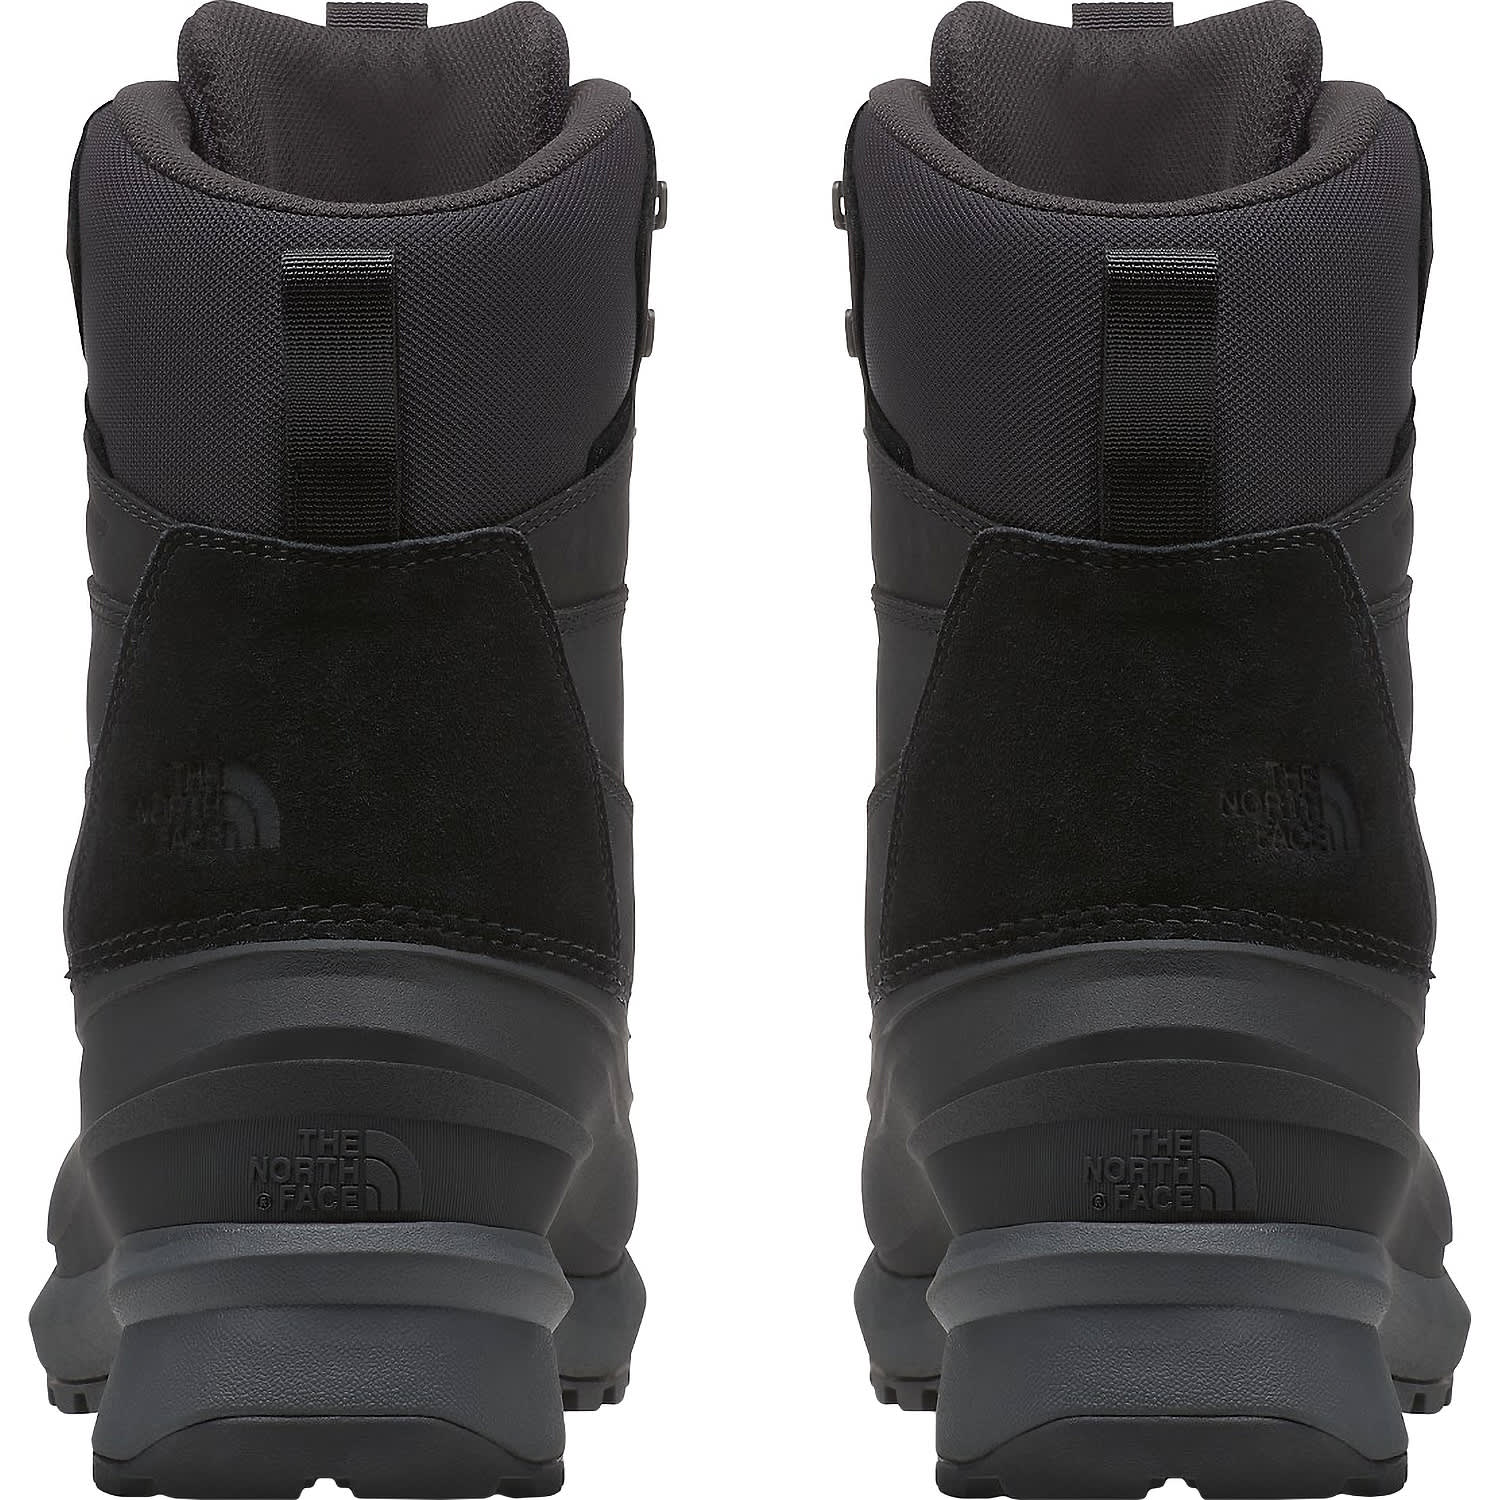 The North Face® Men’s Chilkat V 400 Waterproof Boots